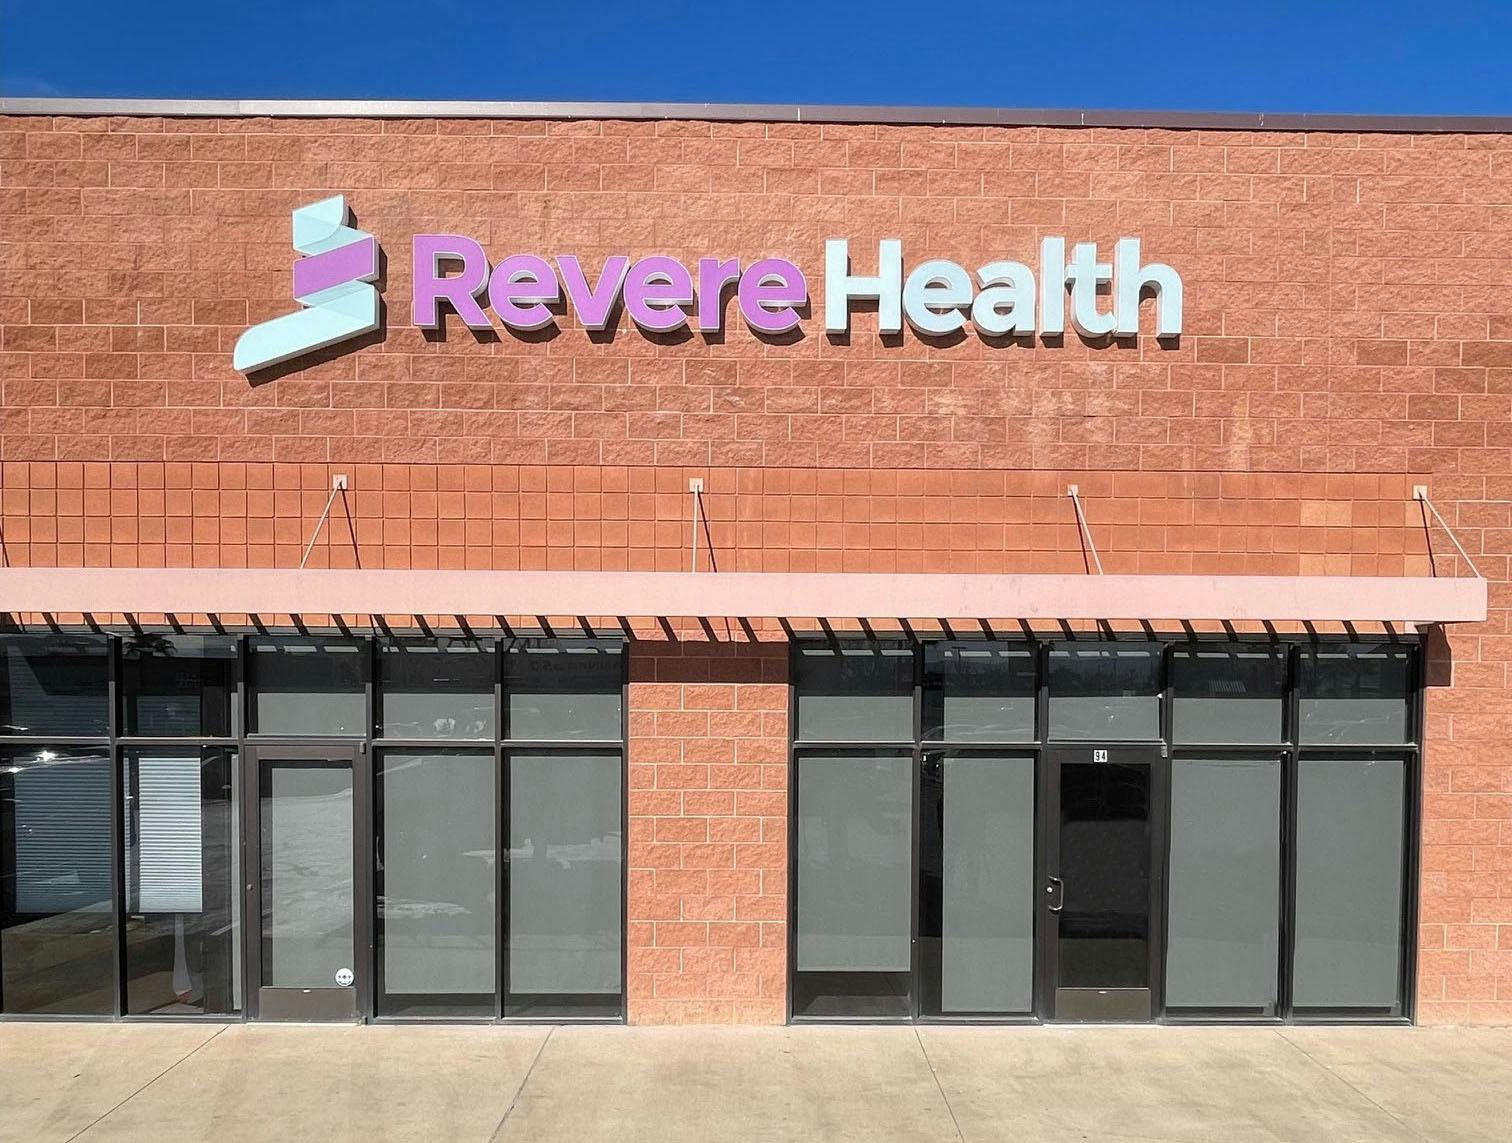 Revere Health to open new location in St. George